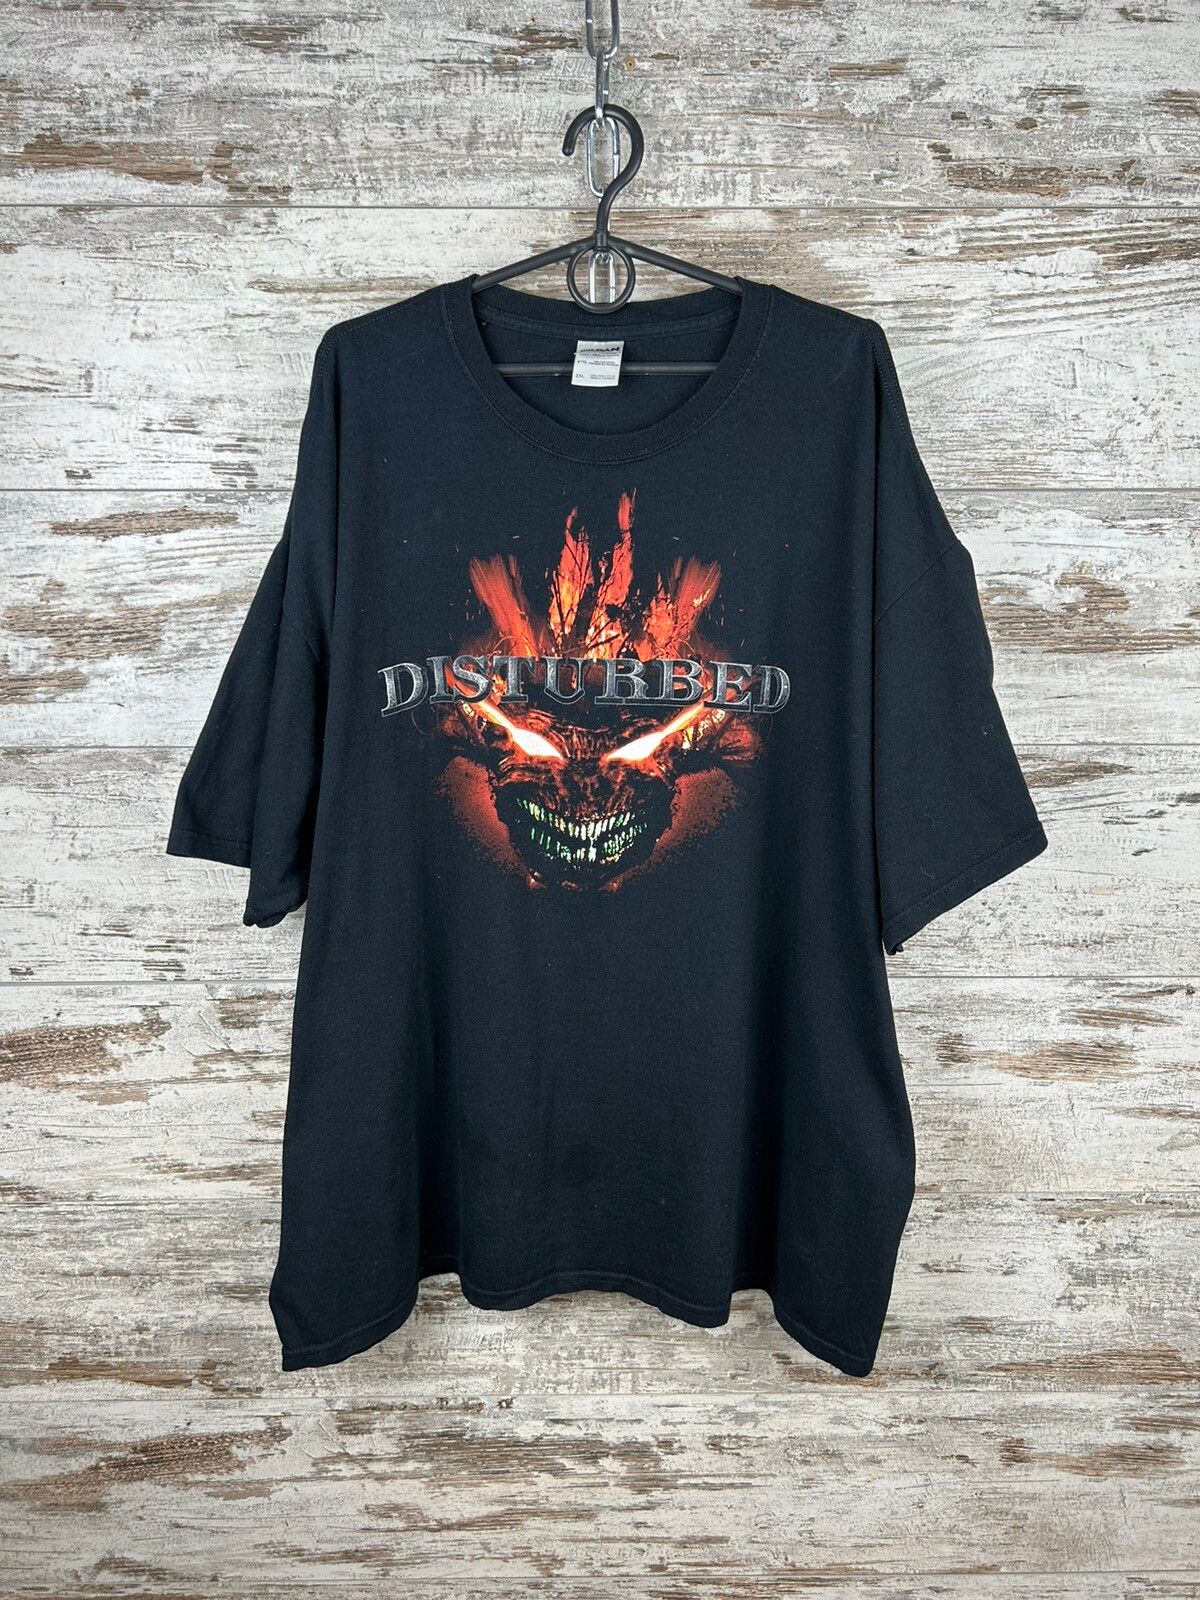 Pre-owned Rock Band X Rock T Shirt Mens Vintage Disturbed T Shirt Rock Band Tee In Black